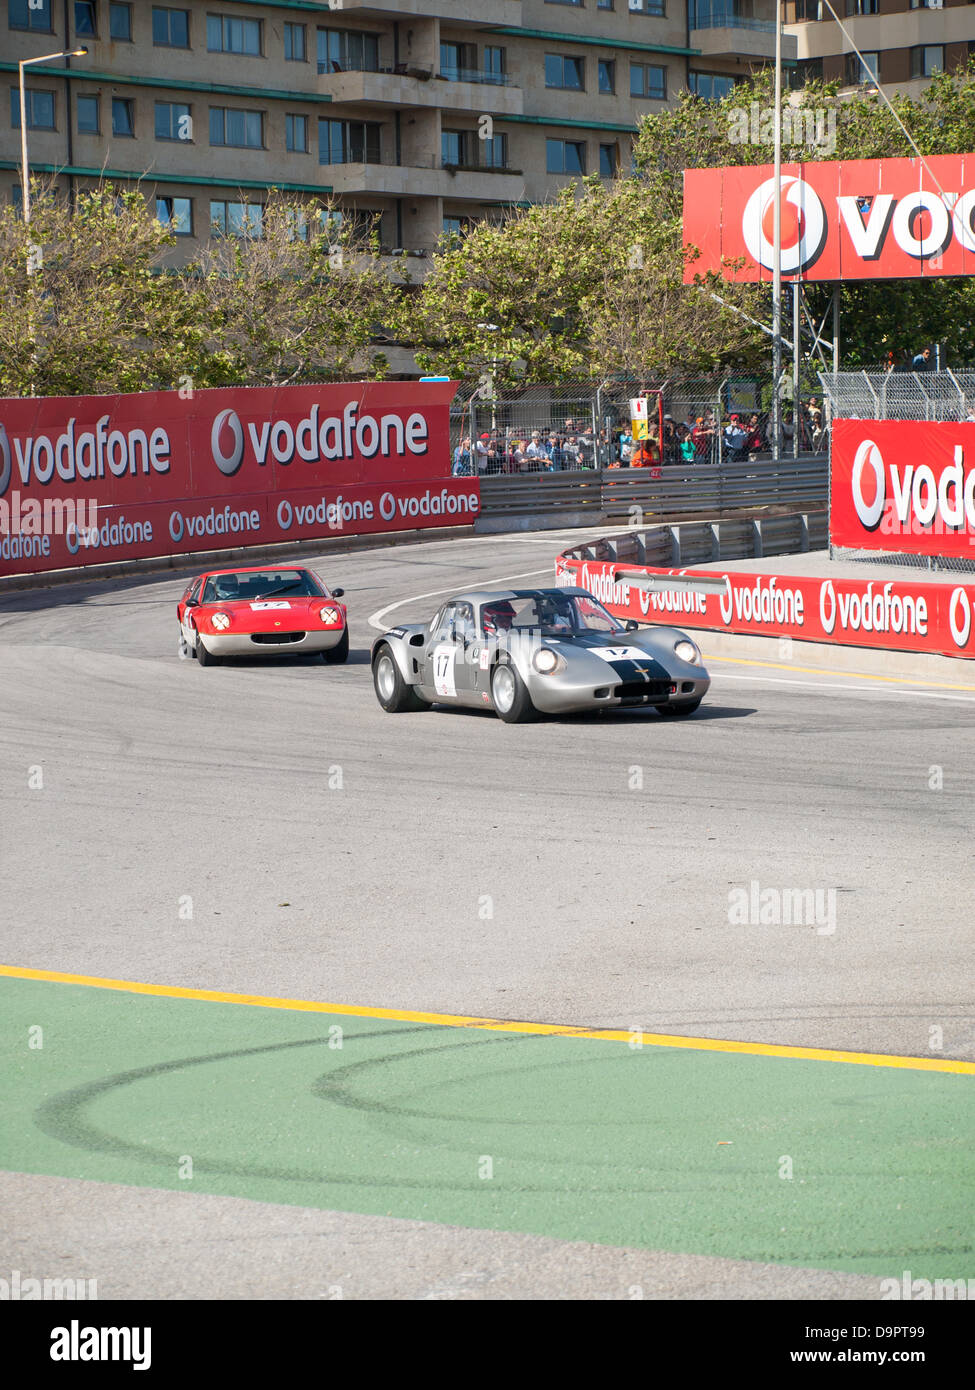 Oporto, Portugal, 22nd june 2013, Circuito da Boavista - Historic Grand Prix 2013 - Classic Endurance Racing Proto 2 L & GT, Qualifying 2, Jean Brandenburg / Jean-Luc George, driving car 17, a grey Chevron B8 BMW from 1968 (front car) and Jacques Roucolle / Joseph Zago, driving car 47, a red Lotus 47 from 1967 (back) Stock Photo